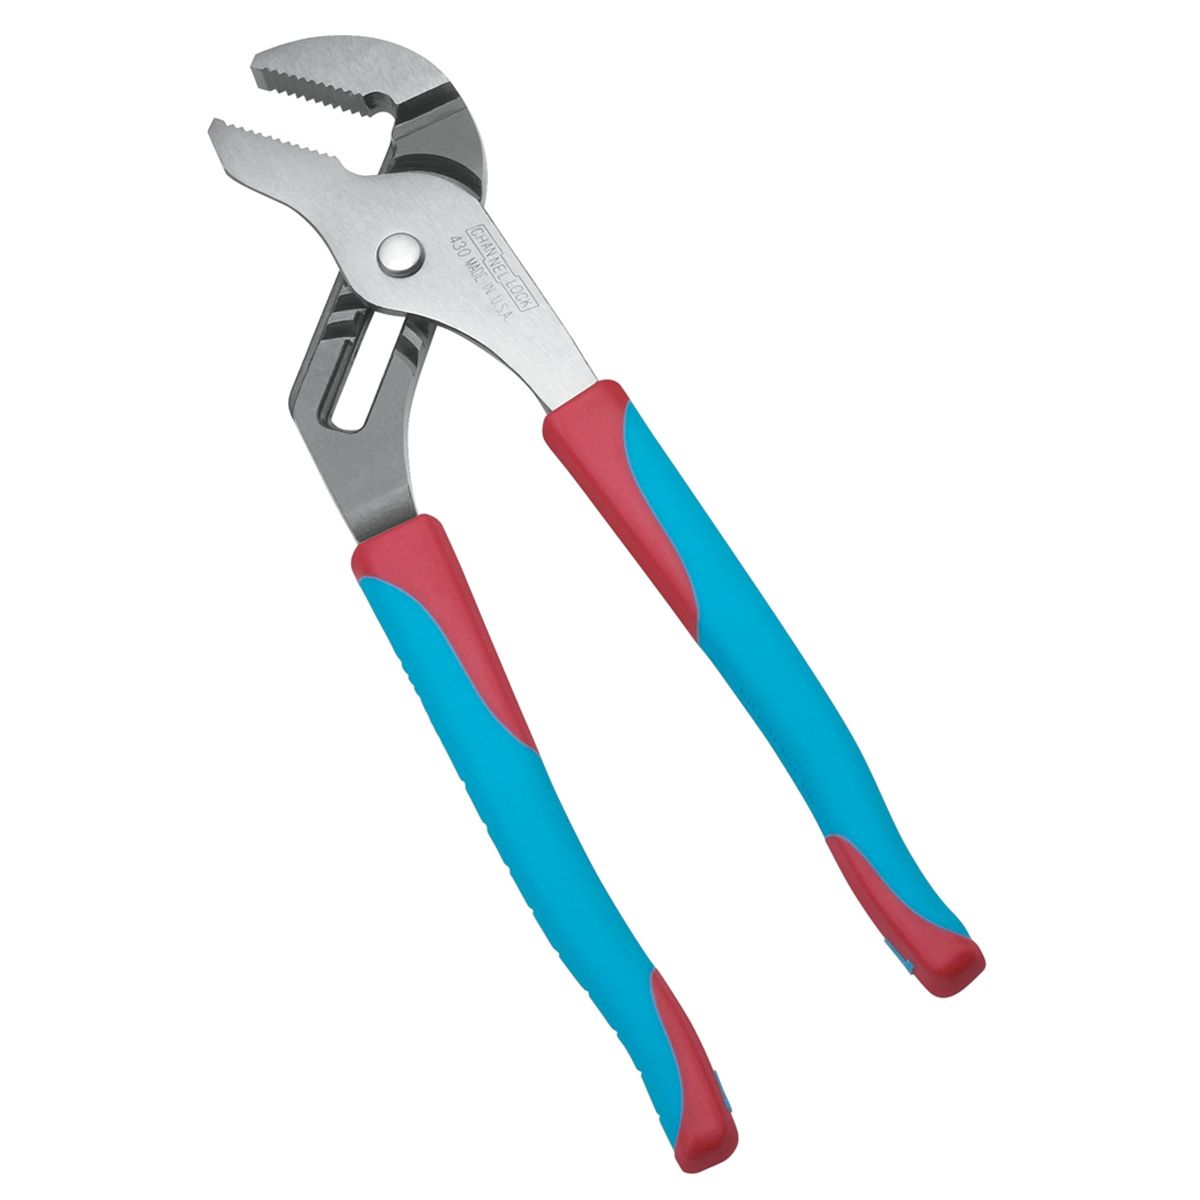 Channellock 415 10in. SMOOTH JAW TONGUE & GROOVE PLIERS